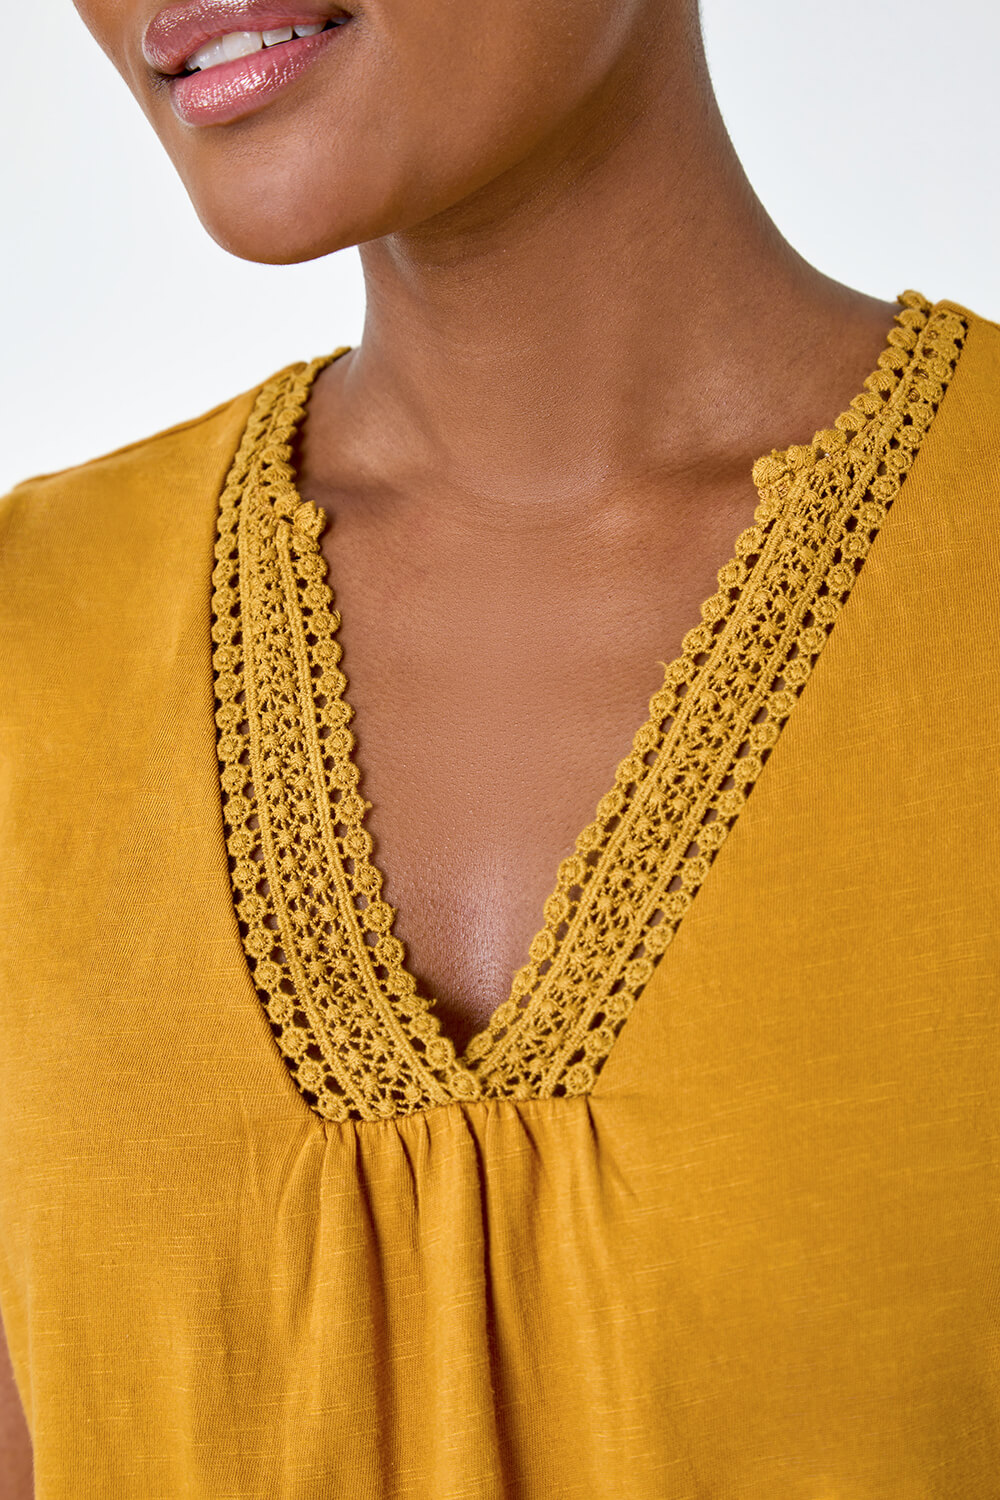 Ochre Sleeveless Lace Trim Cotton Top, Image 5 of 5